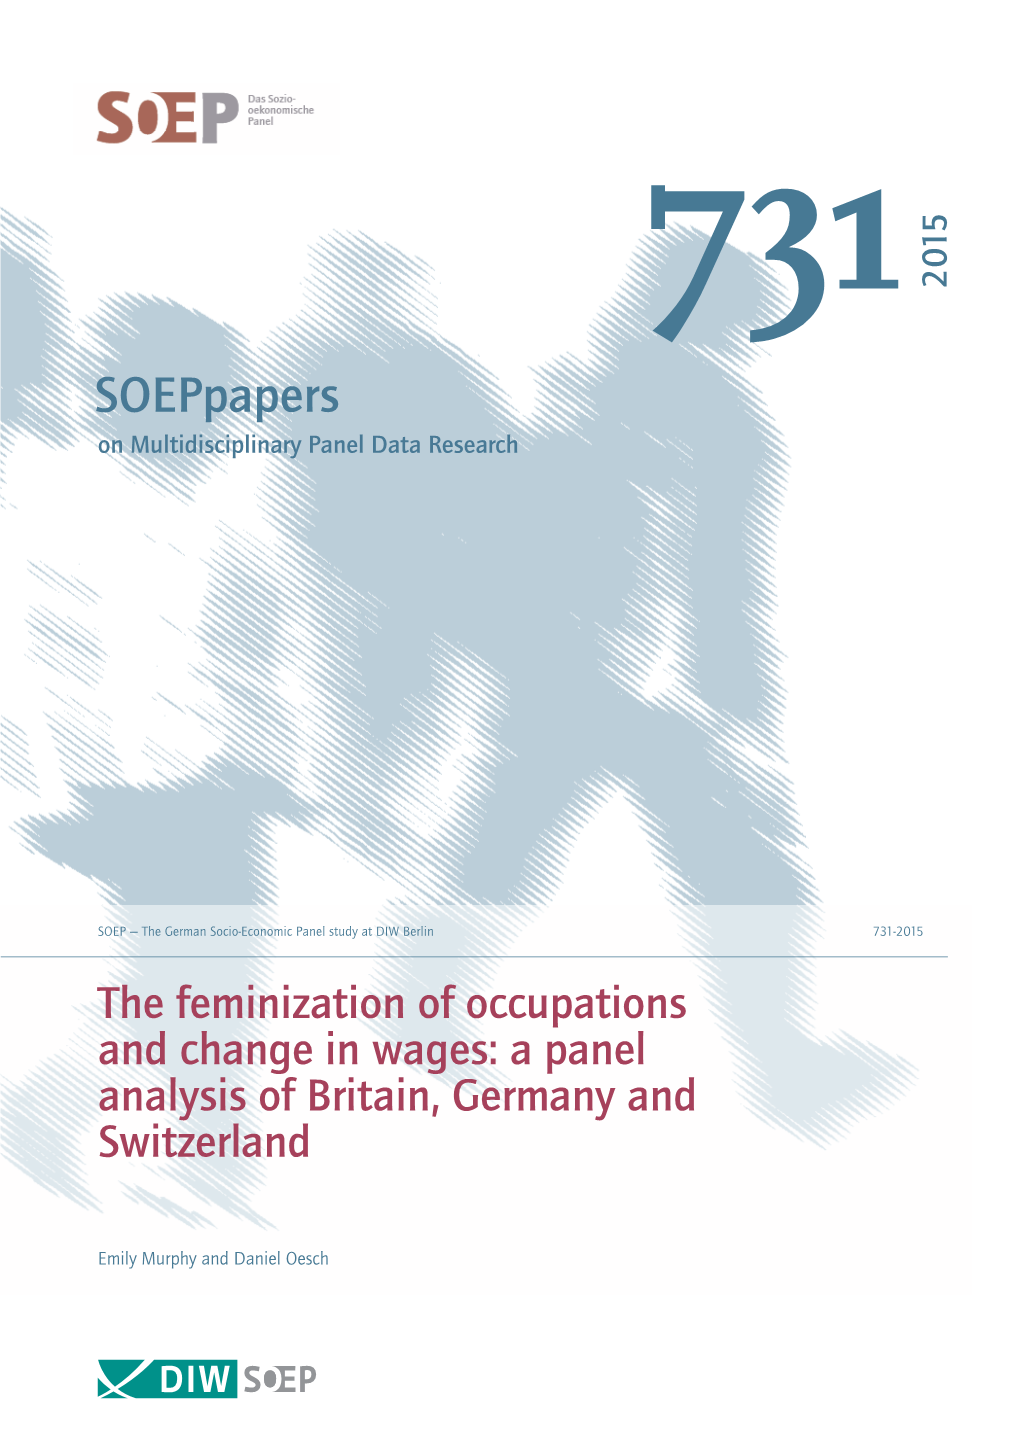 The Feminization of Occupations and Change in Wages: a Panel Analysis of Britain, Germany and Switzerland